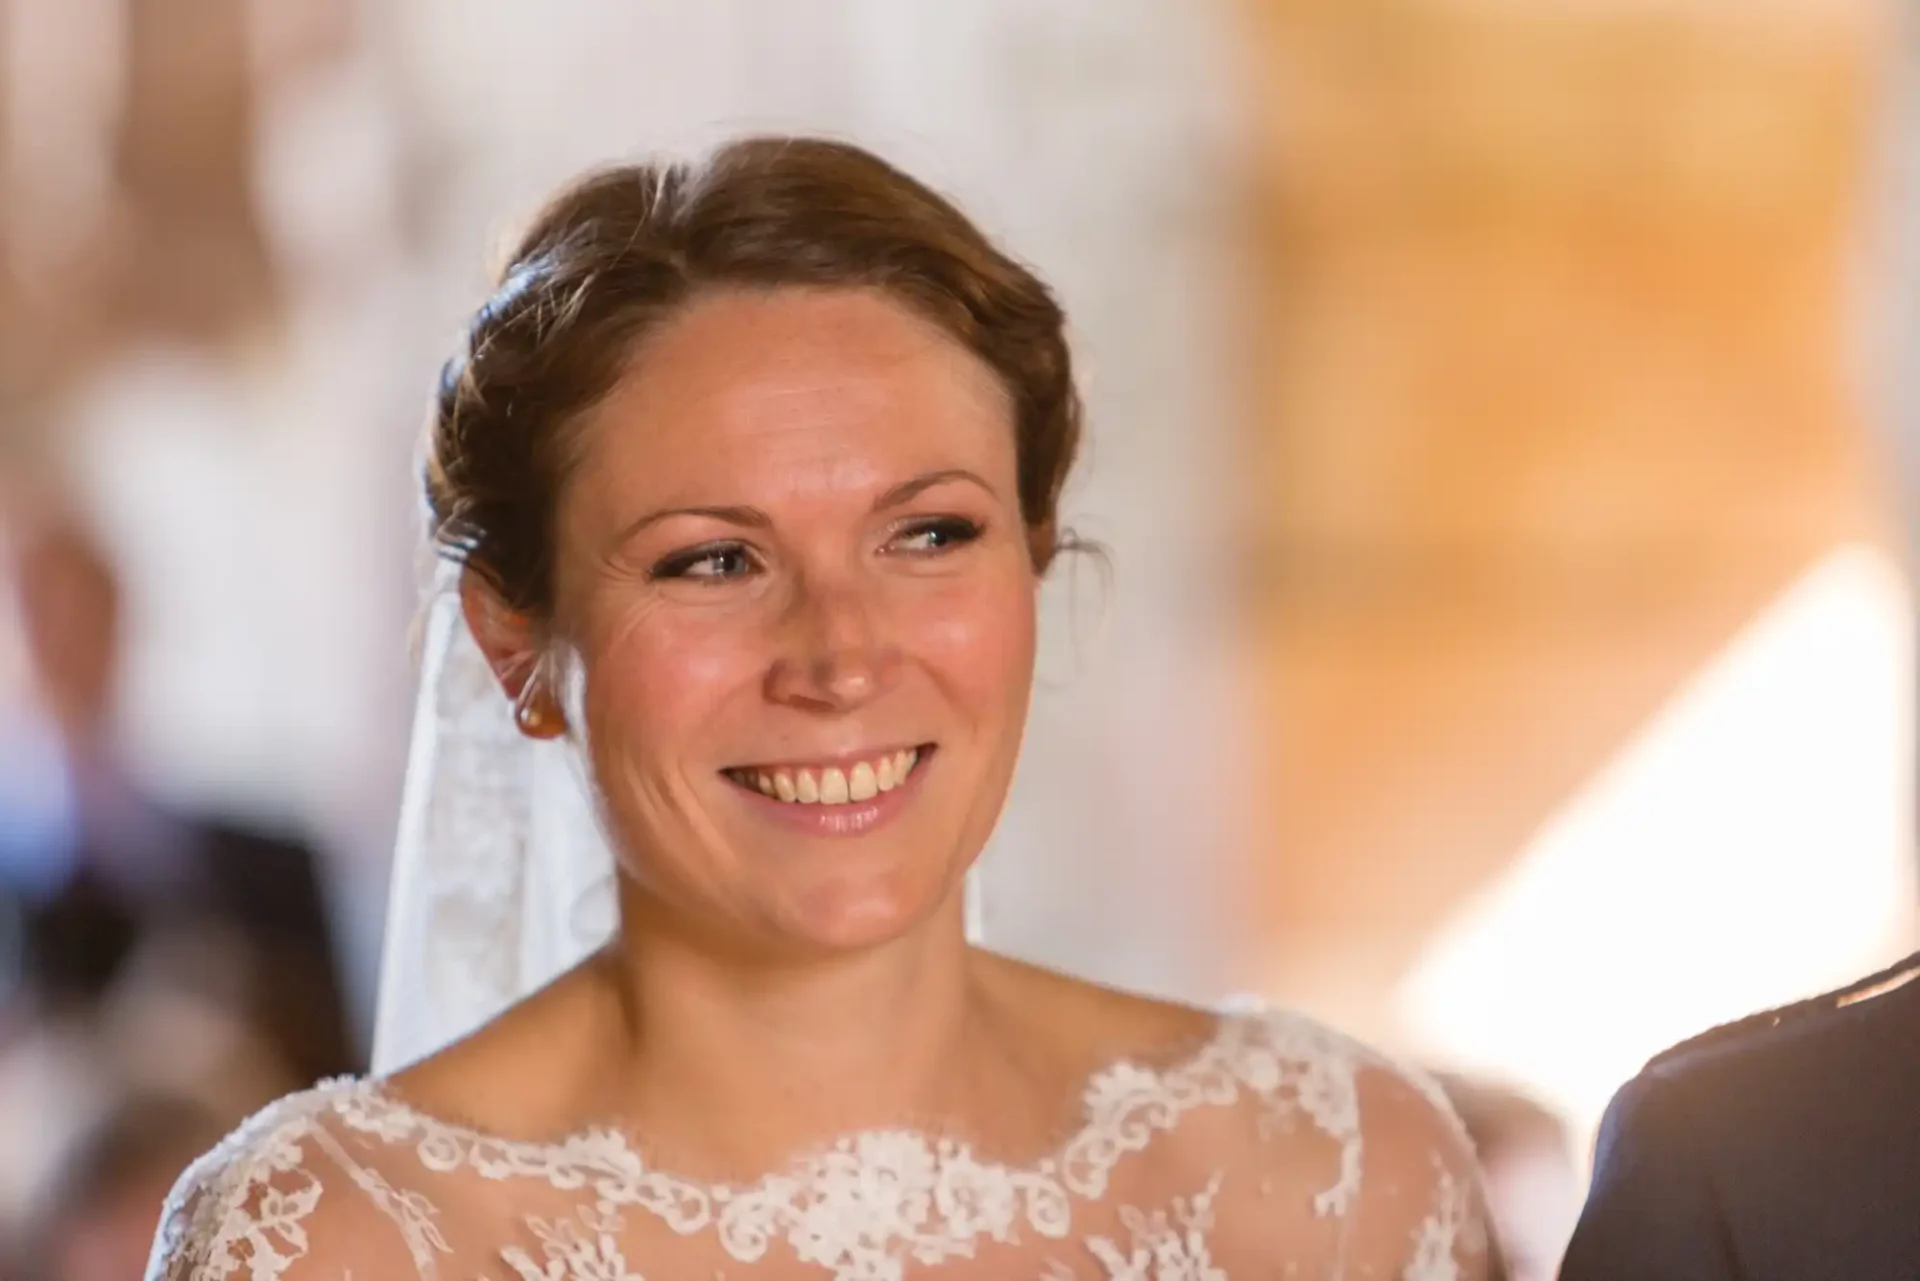 A smiling bride wearing a lace wedding dress and veil, with soft focus and warm lighting in the background.